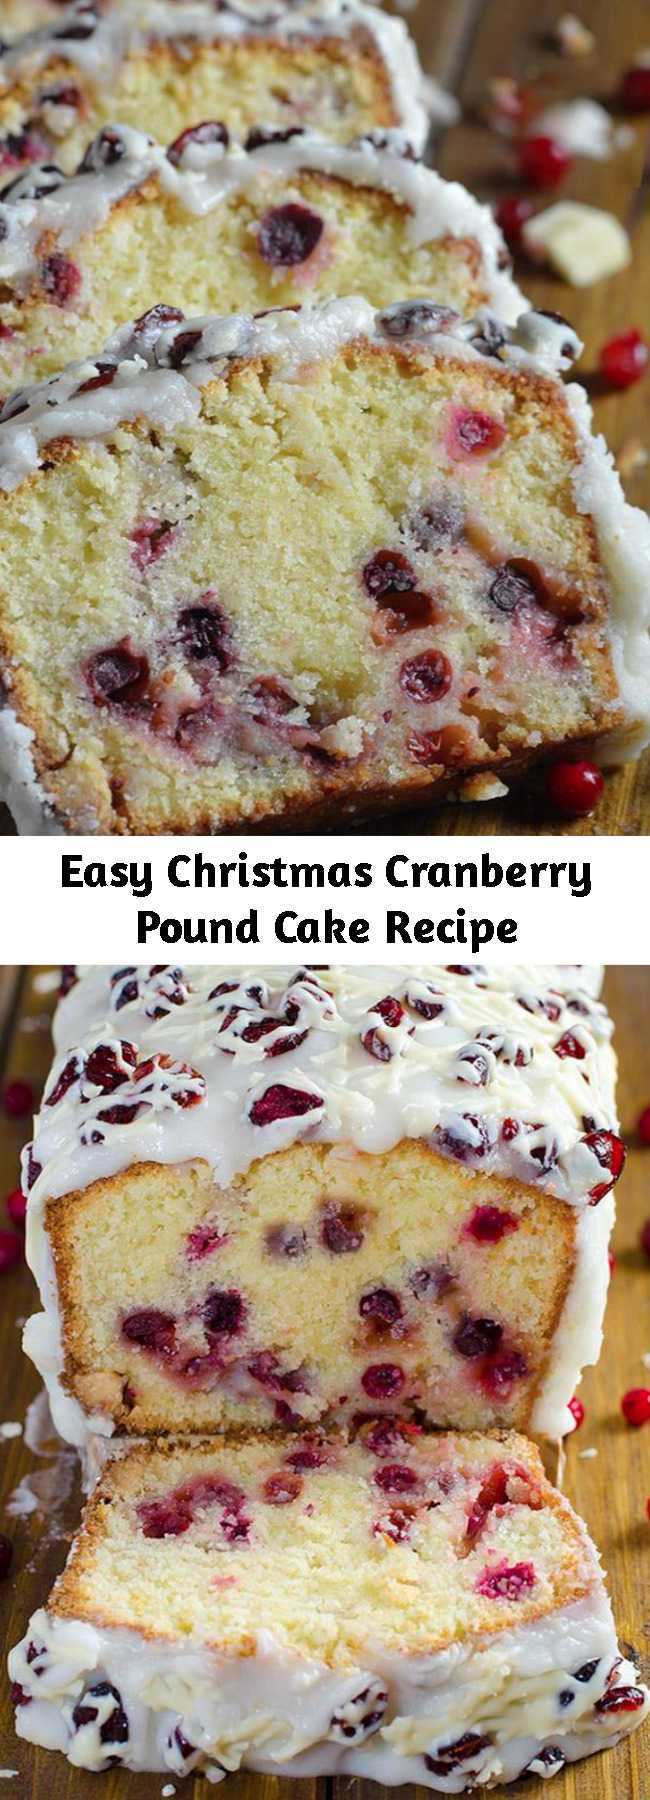 Easy Christmas Cranberry Pound Cake Recipe - Looking for perfect, delicious and easy Christmas dessert recipe? Then you should try this decadent pound cake with cranberries, white chocolate and cream cheese frosting! Your family would love to have this cake for Christmas, for sure!